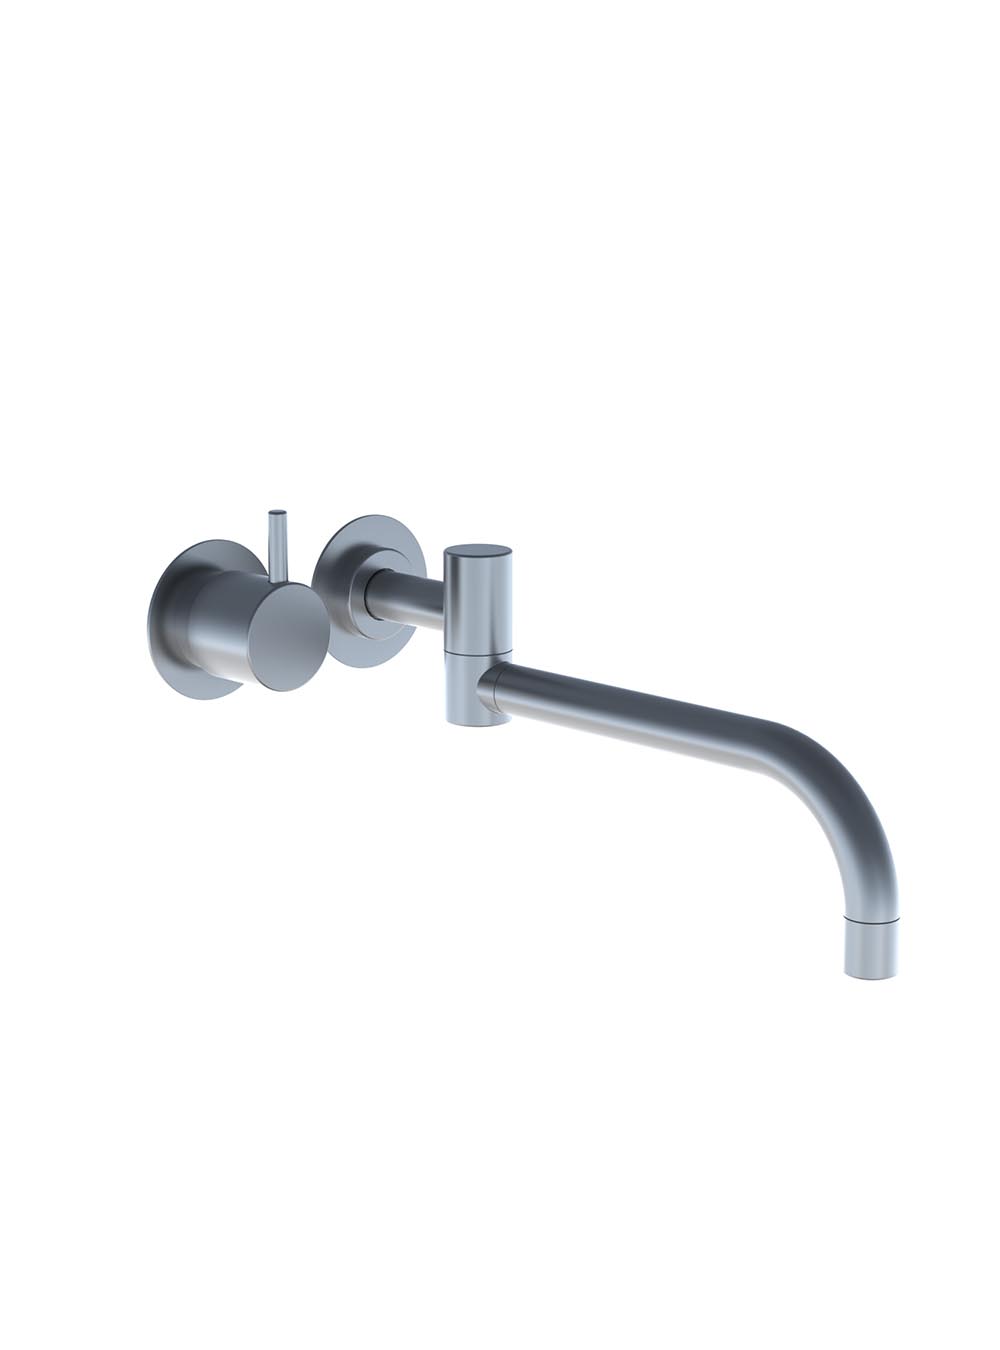 931: Build-in single feed with ceramic disc technology.931UP = Valve 900.931AP = Handle NR17, 250 mm d...